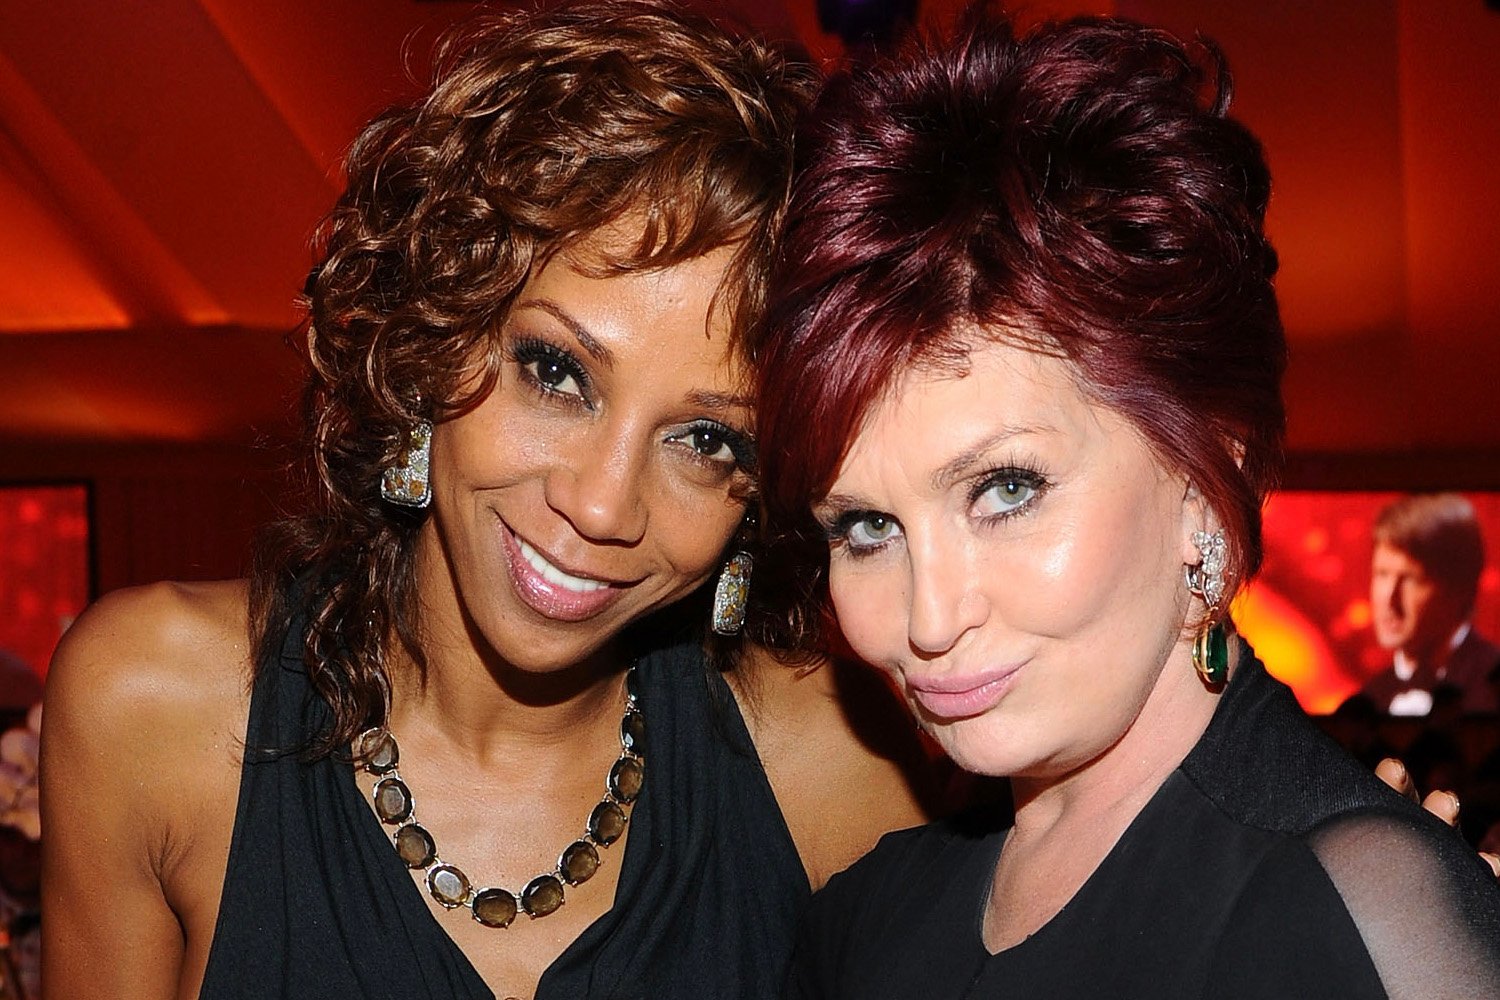 Holly Robinson Peete and Sharon Osbourne share a moment together back in 2011